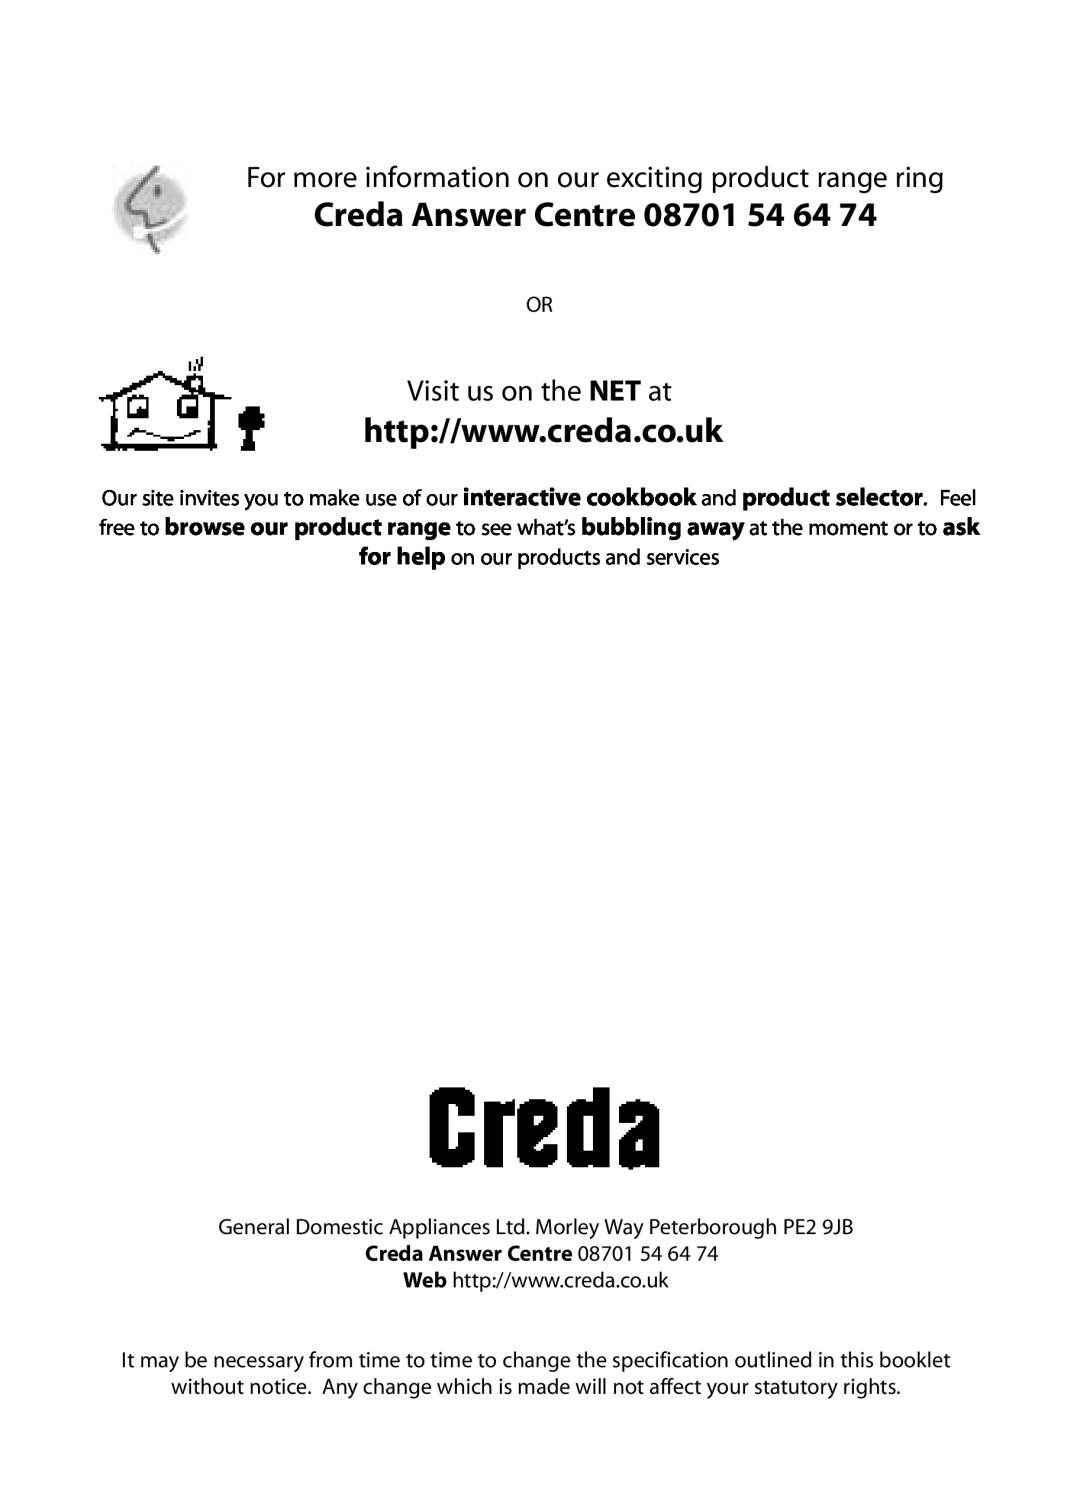 Creda R420E, E420E manual Creda Answer Centre 08701 54 64, For more information on our exciting product range ring 